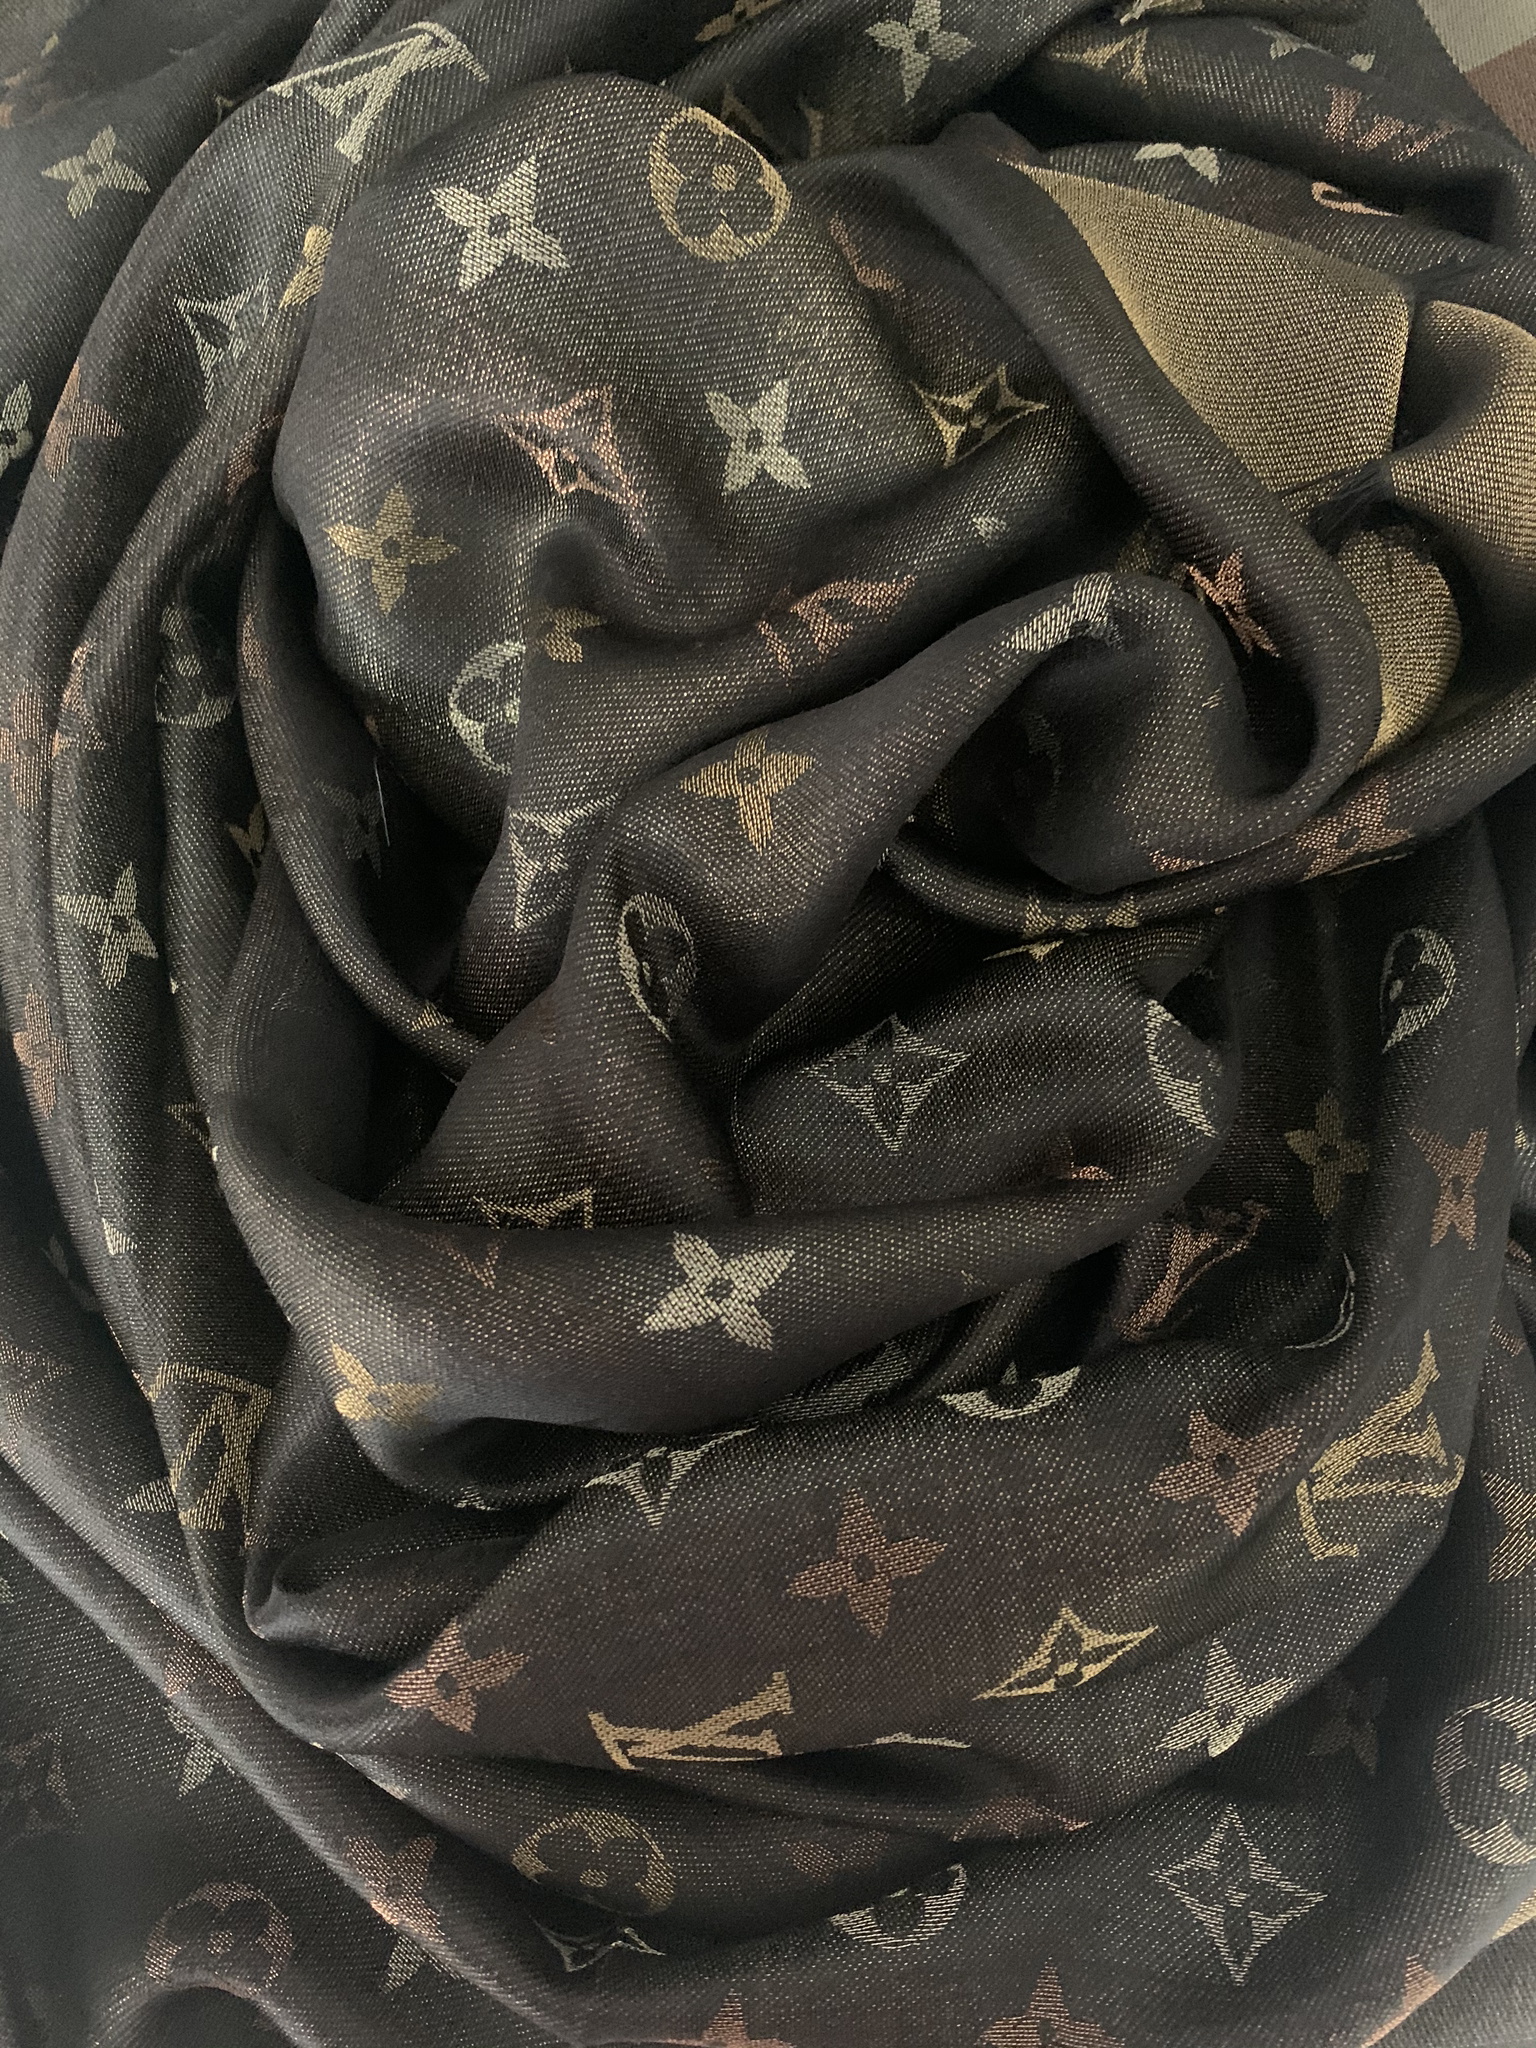 Julia Rose Boston - Gold brown beauty. Louis Vuitton Brown shine shawl.  Might be my fave Bc it is the classic brand colors. Buy here for $365  invoiced and shipped. Retails $675